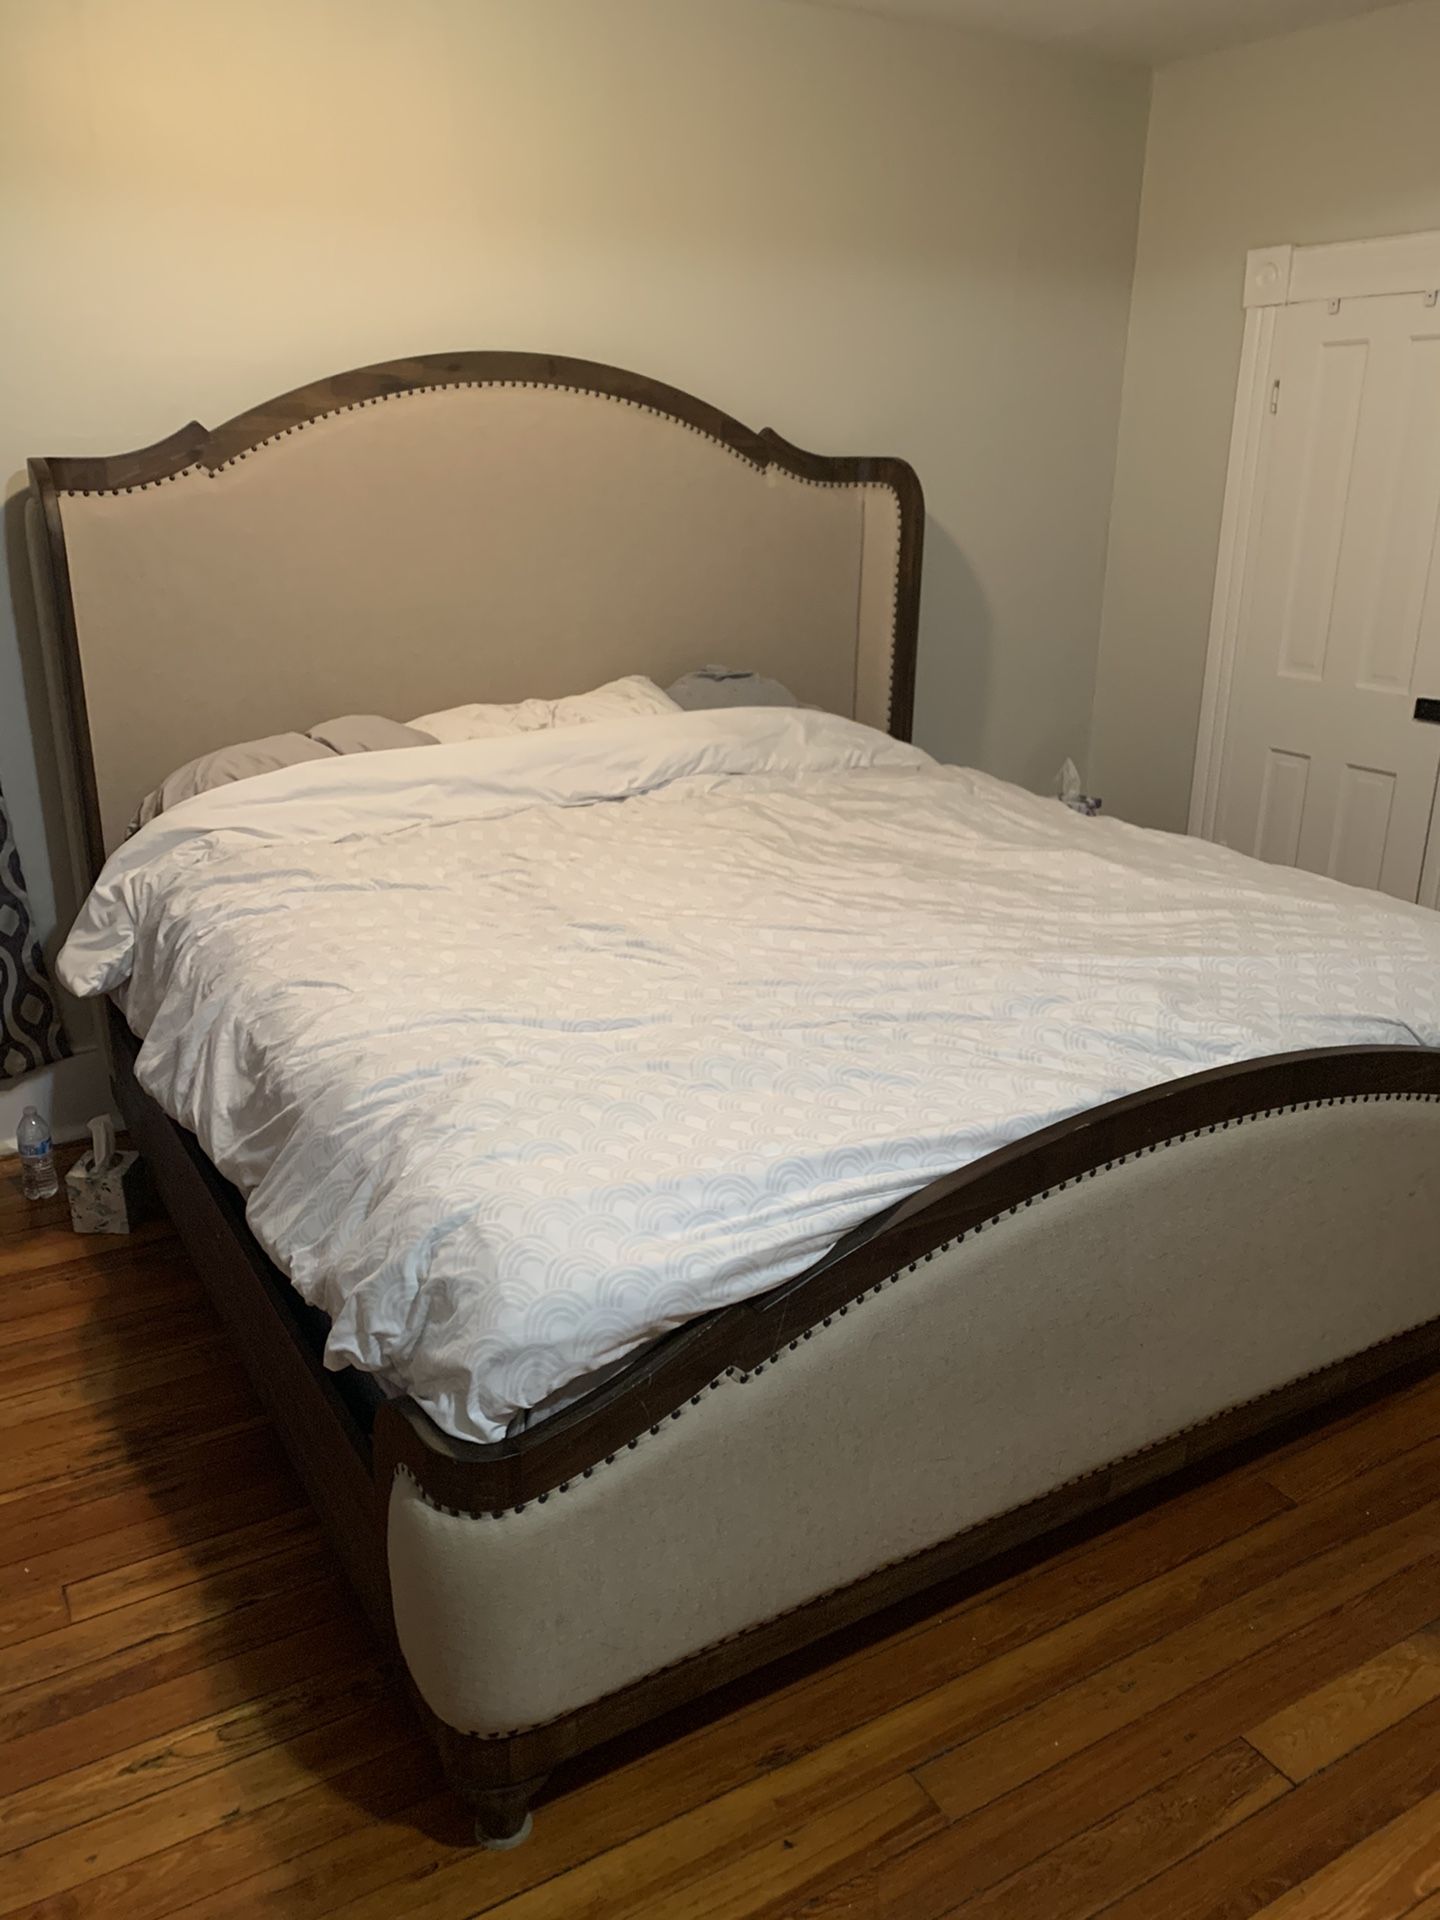 King upholstery bed frame great condition heavy duty